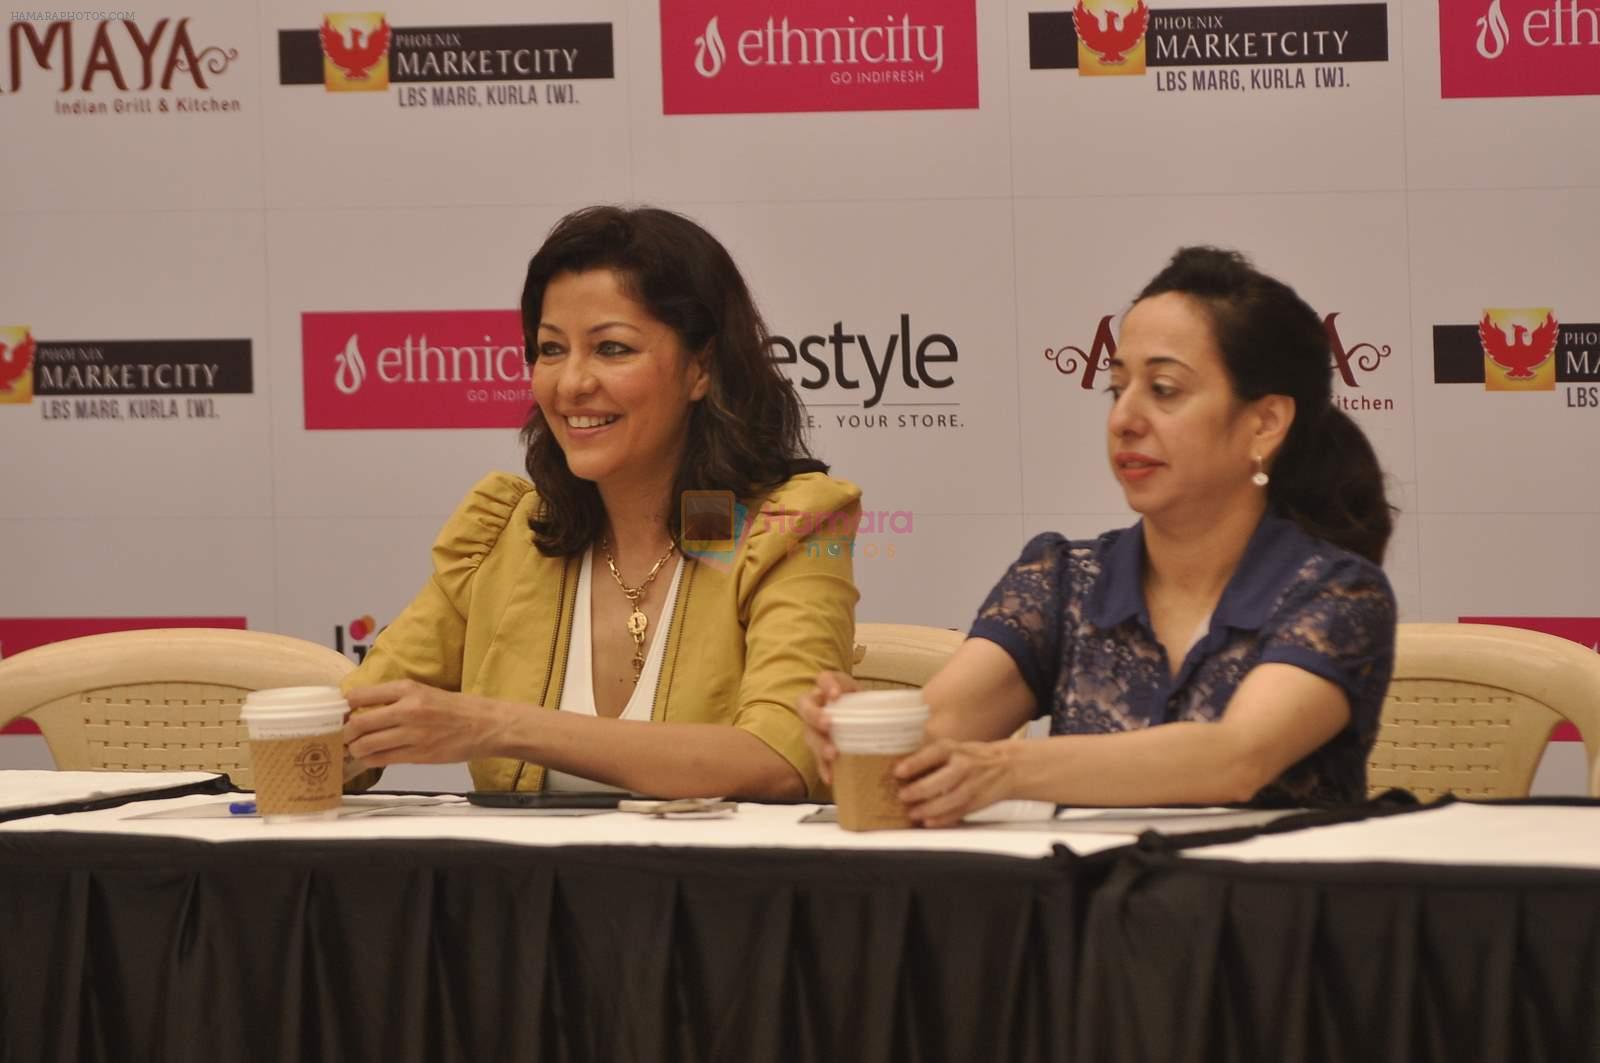 Aditi Gowitrikar at Shine Young event on 13th June 2015